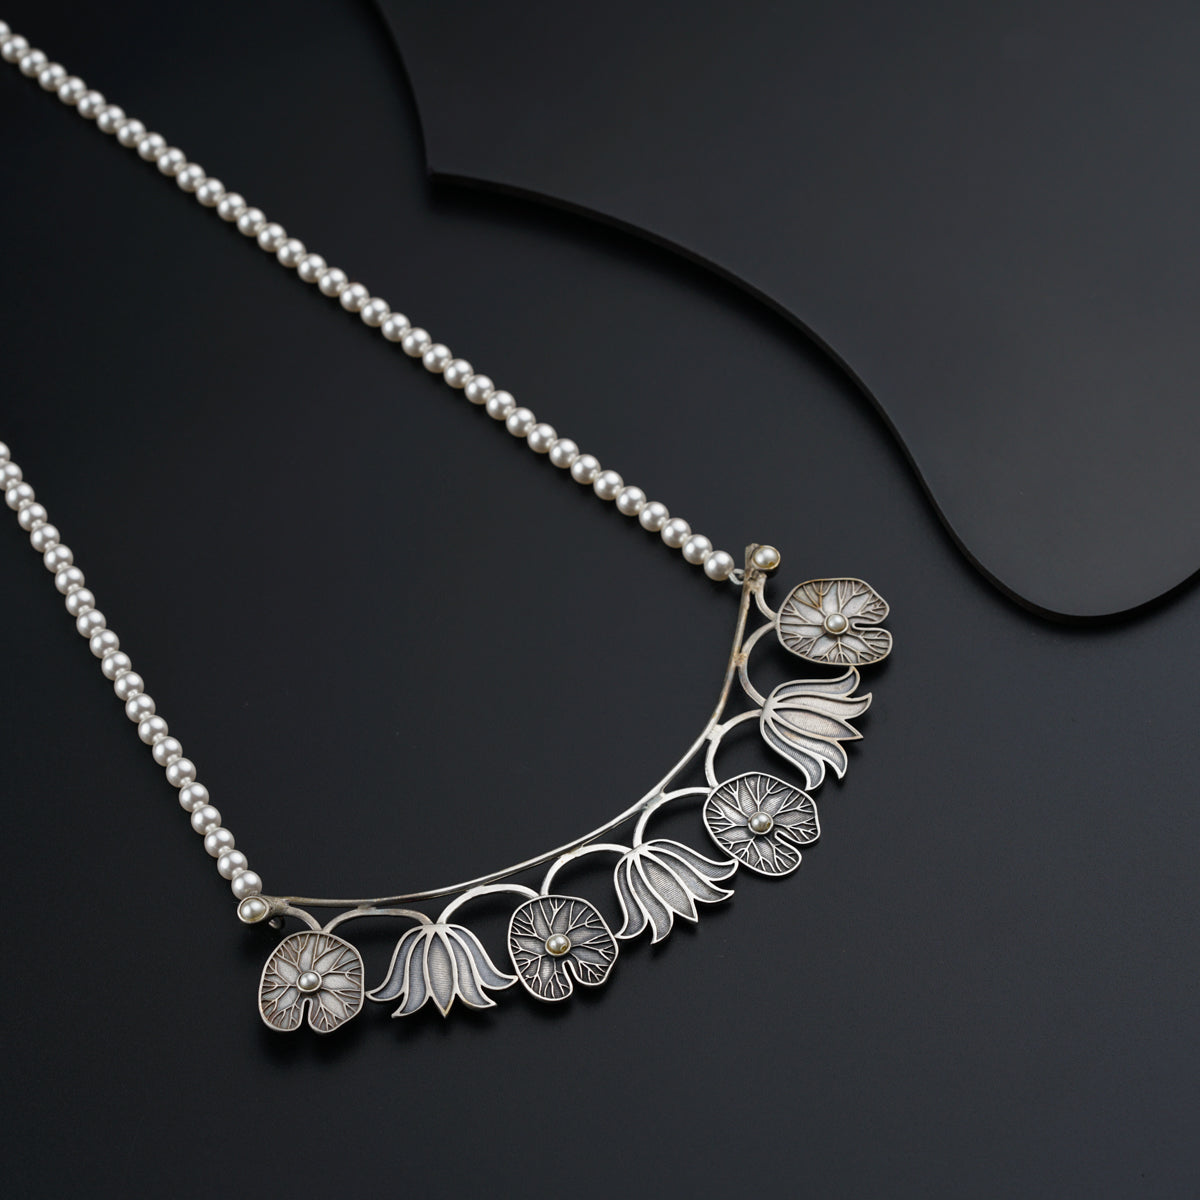 a silver necklace with flowers and leaves on a black surface